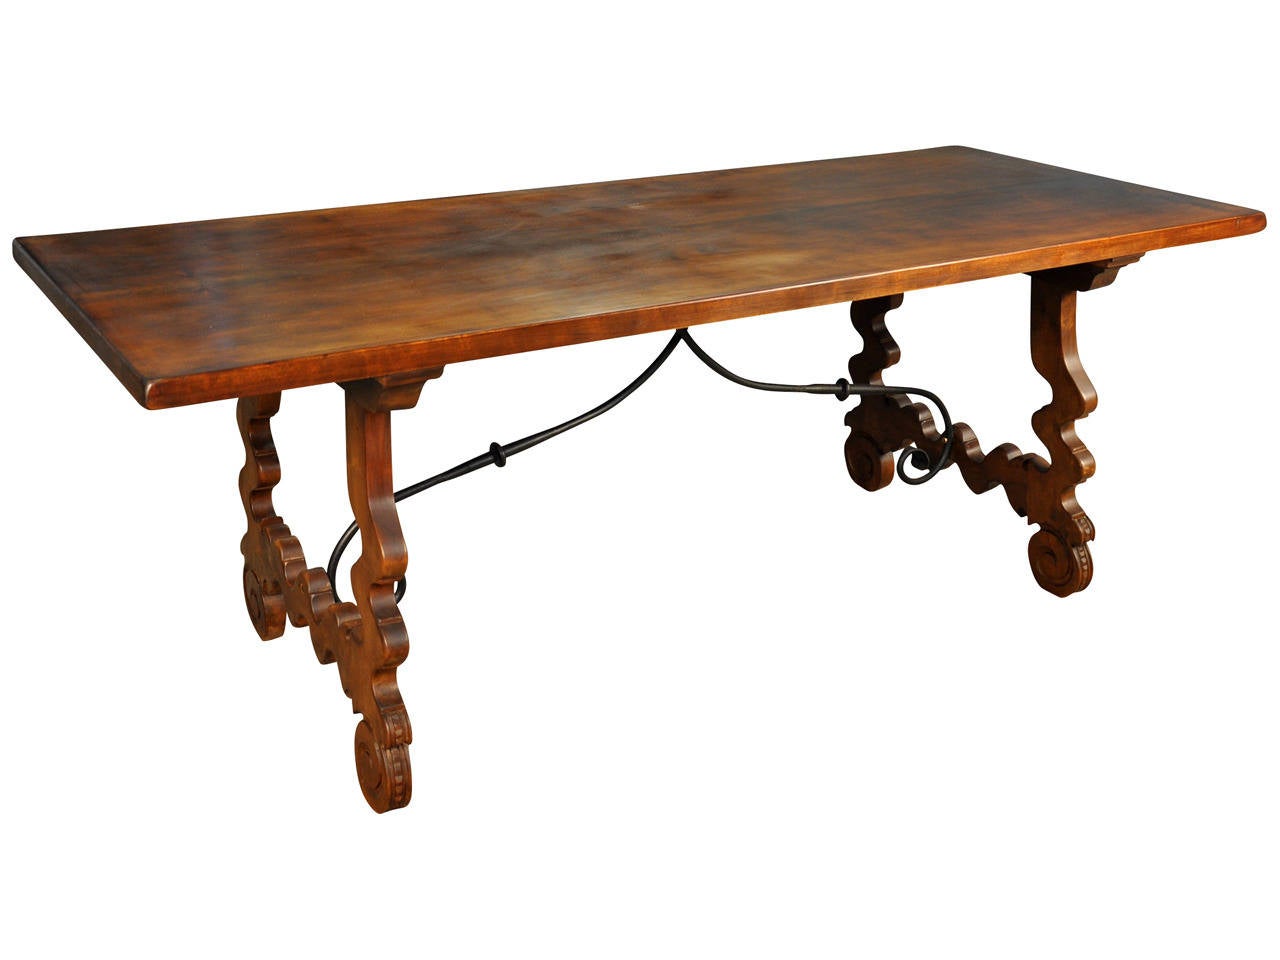 A very handsome early 20th century Spanish Farm Table constructed from walnut and iron trestles.  This striking table not only serves as a wonderful dining or breakfast table - but can be used beautifully as a writing desk or sofa table as well.